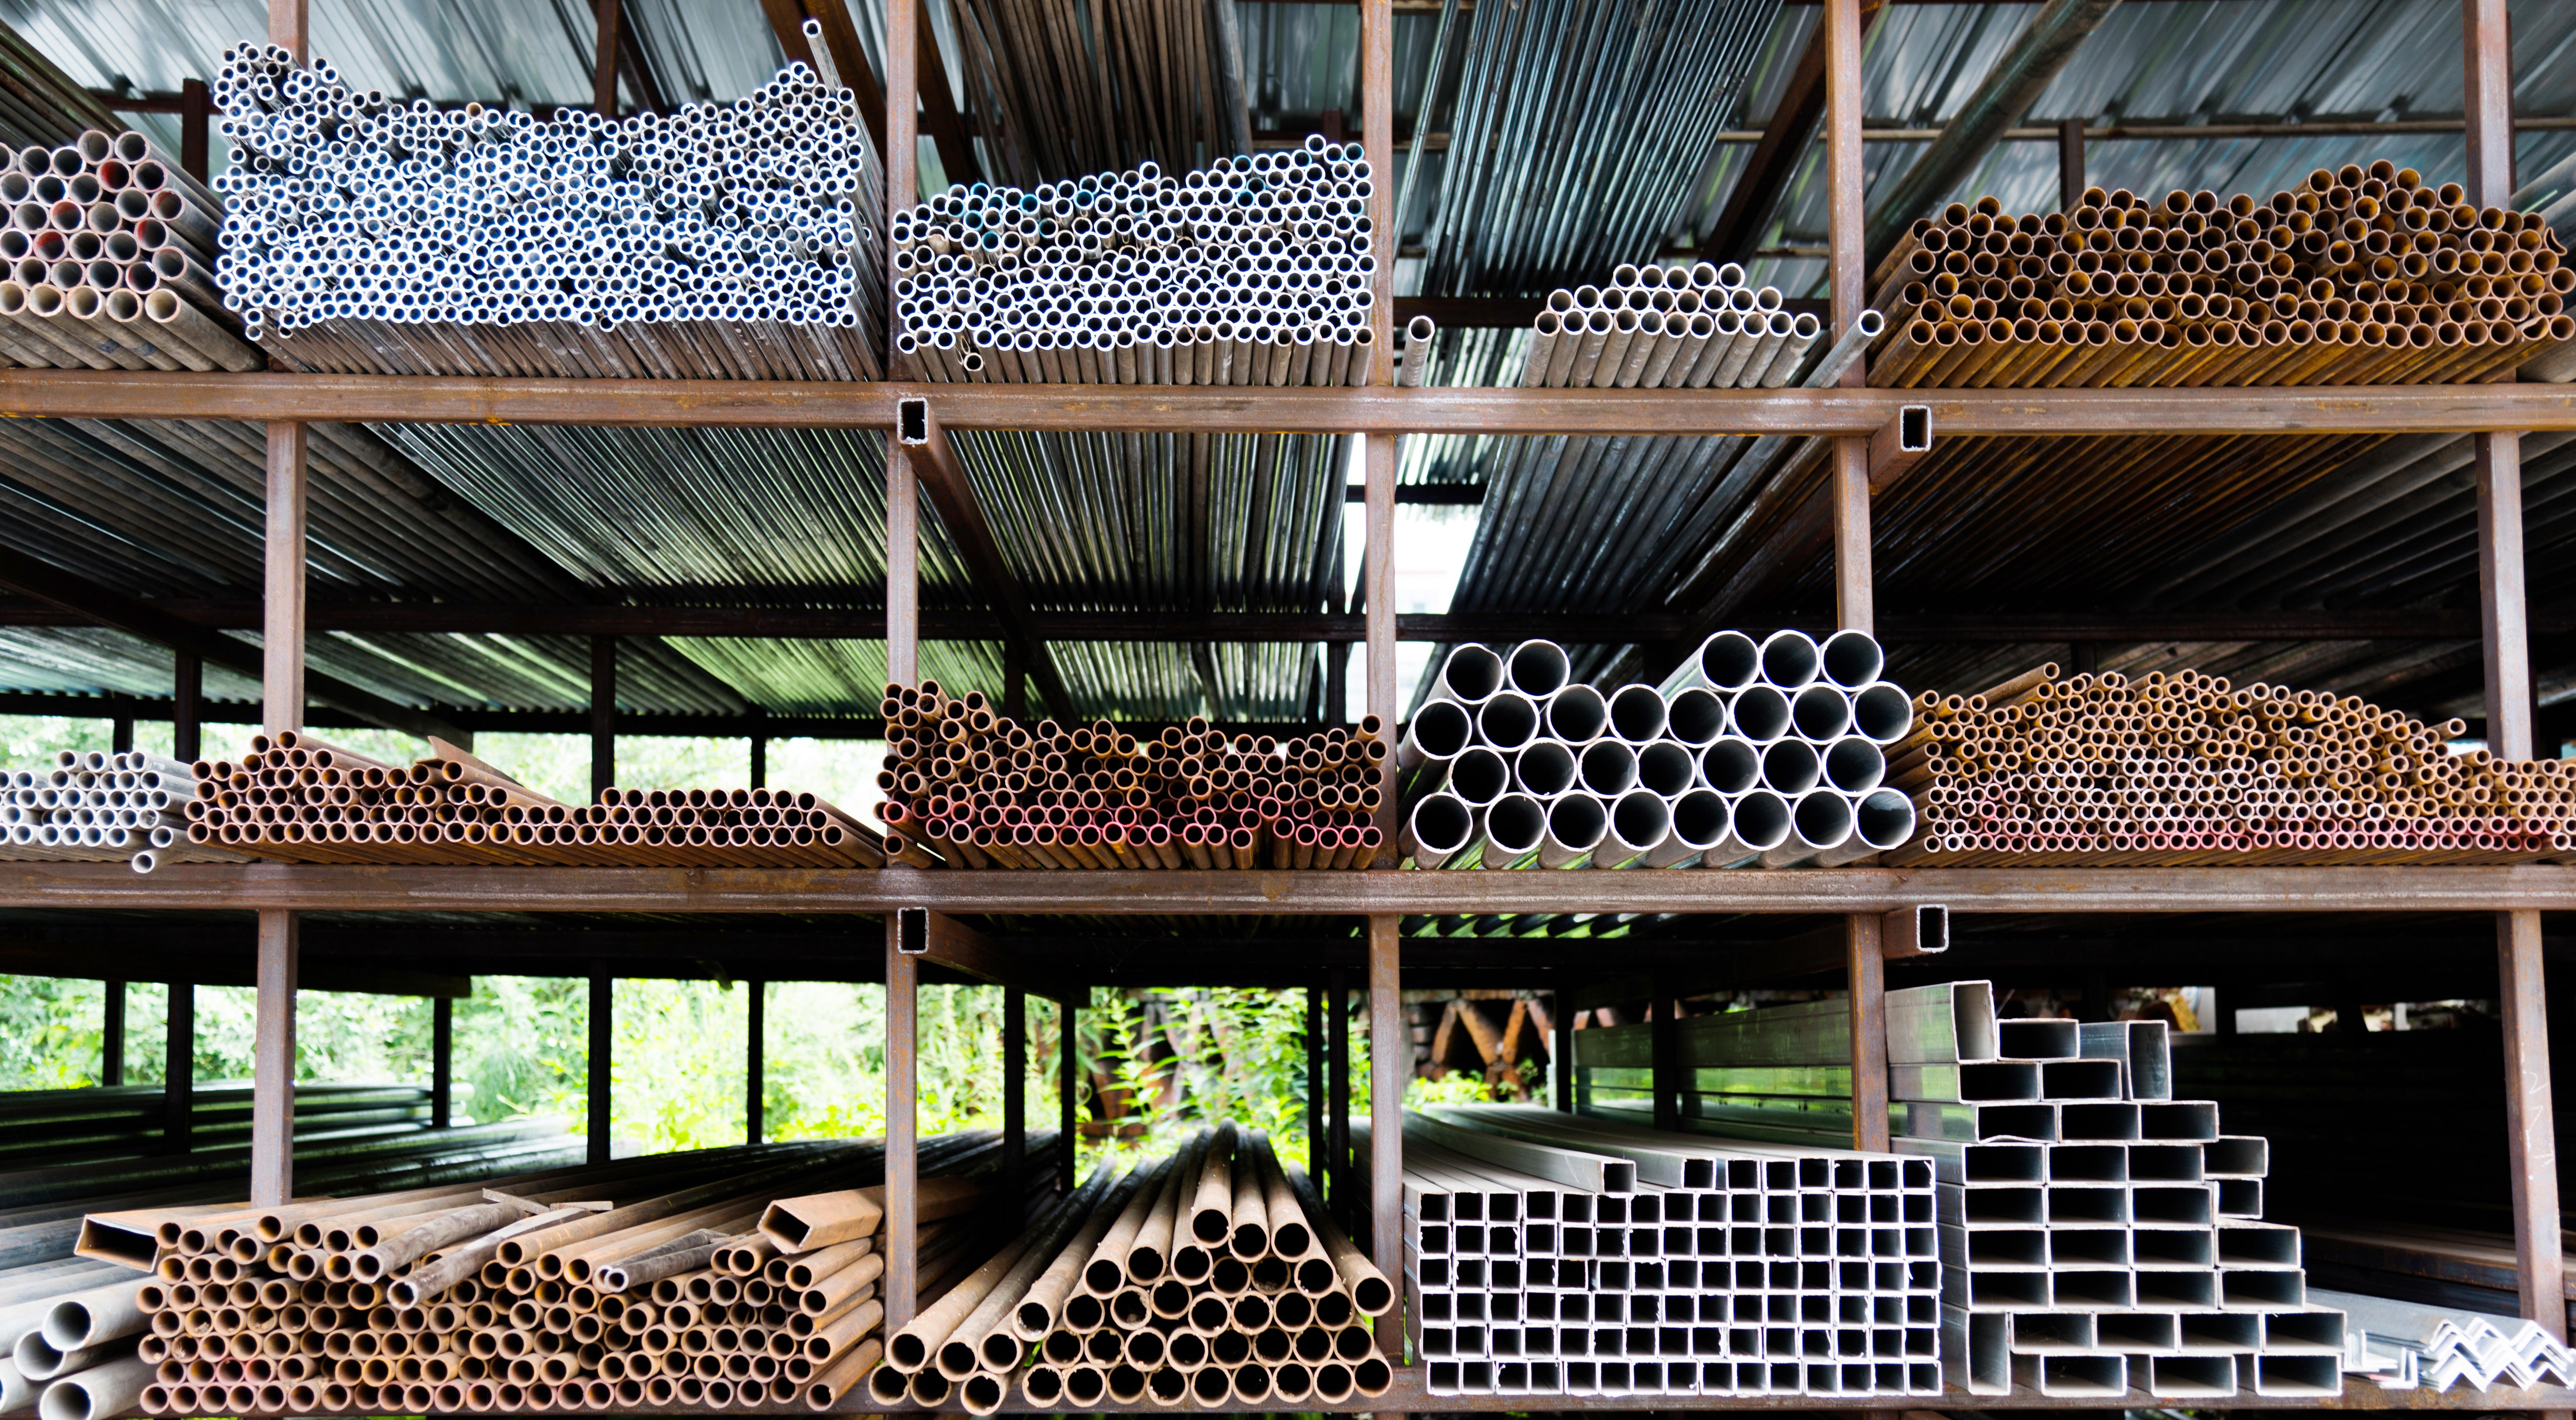 Different sizes of steel tubes on a stock shelf